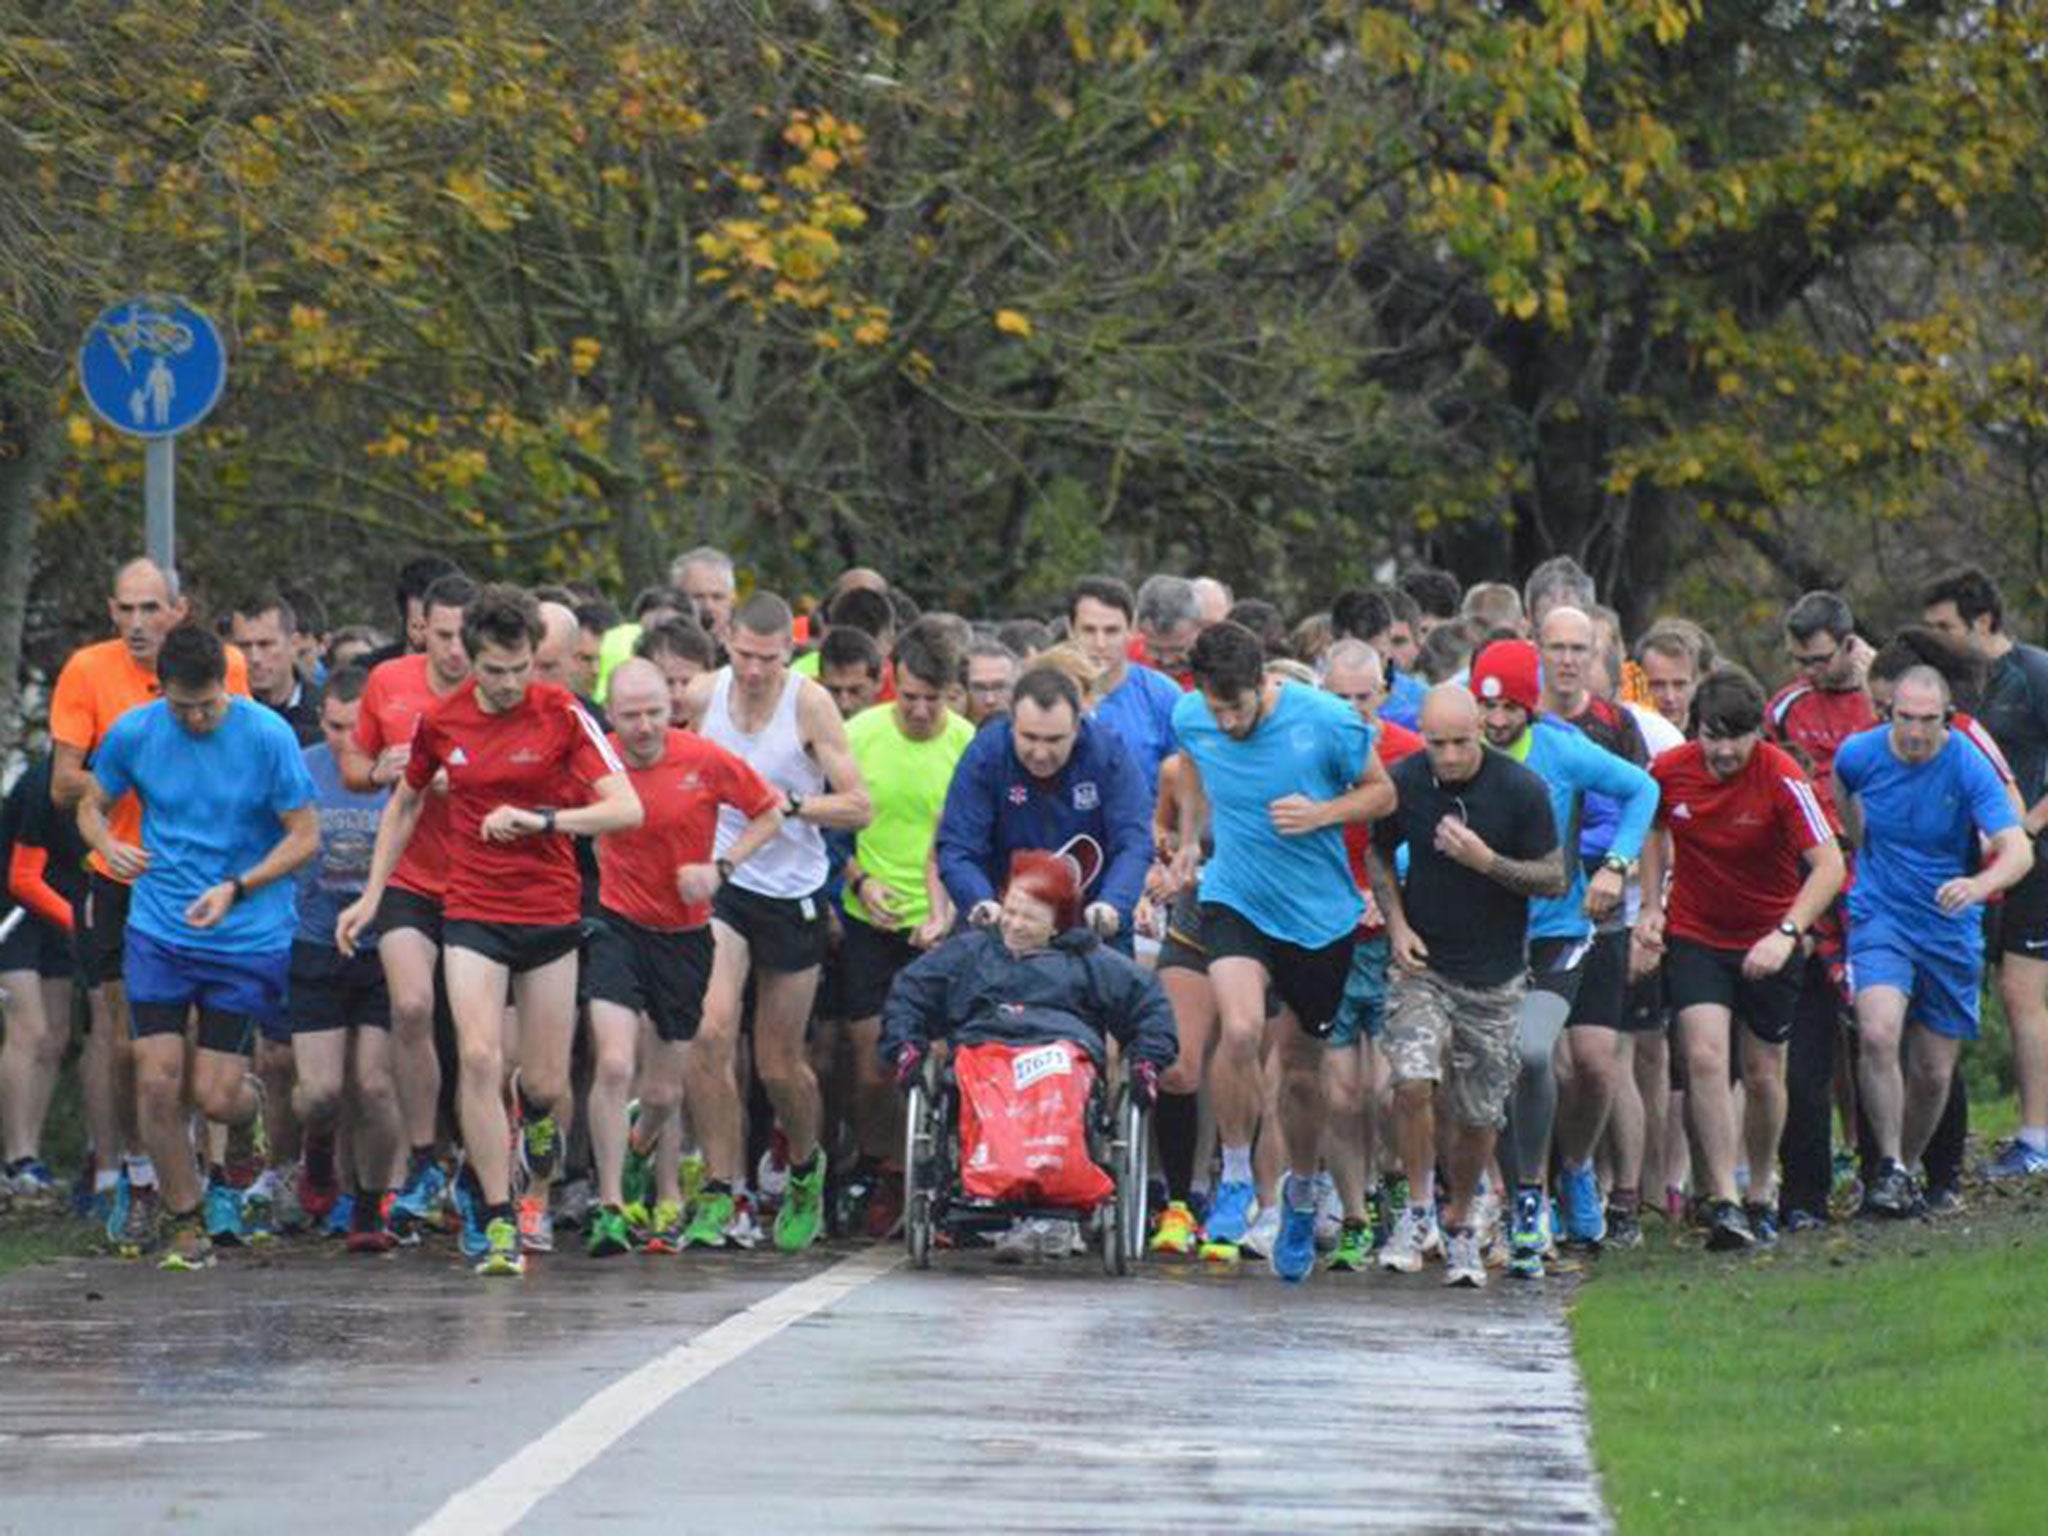 The Little Stoke Parkrun has been holding weekly events for more than three years